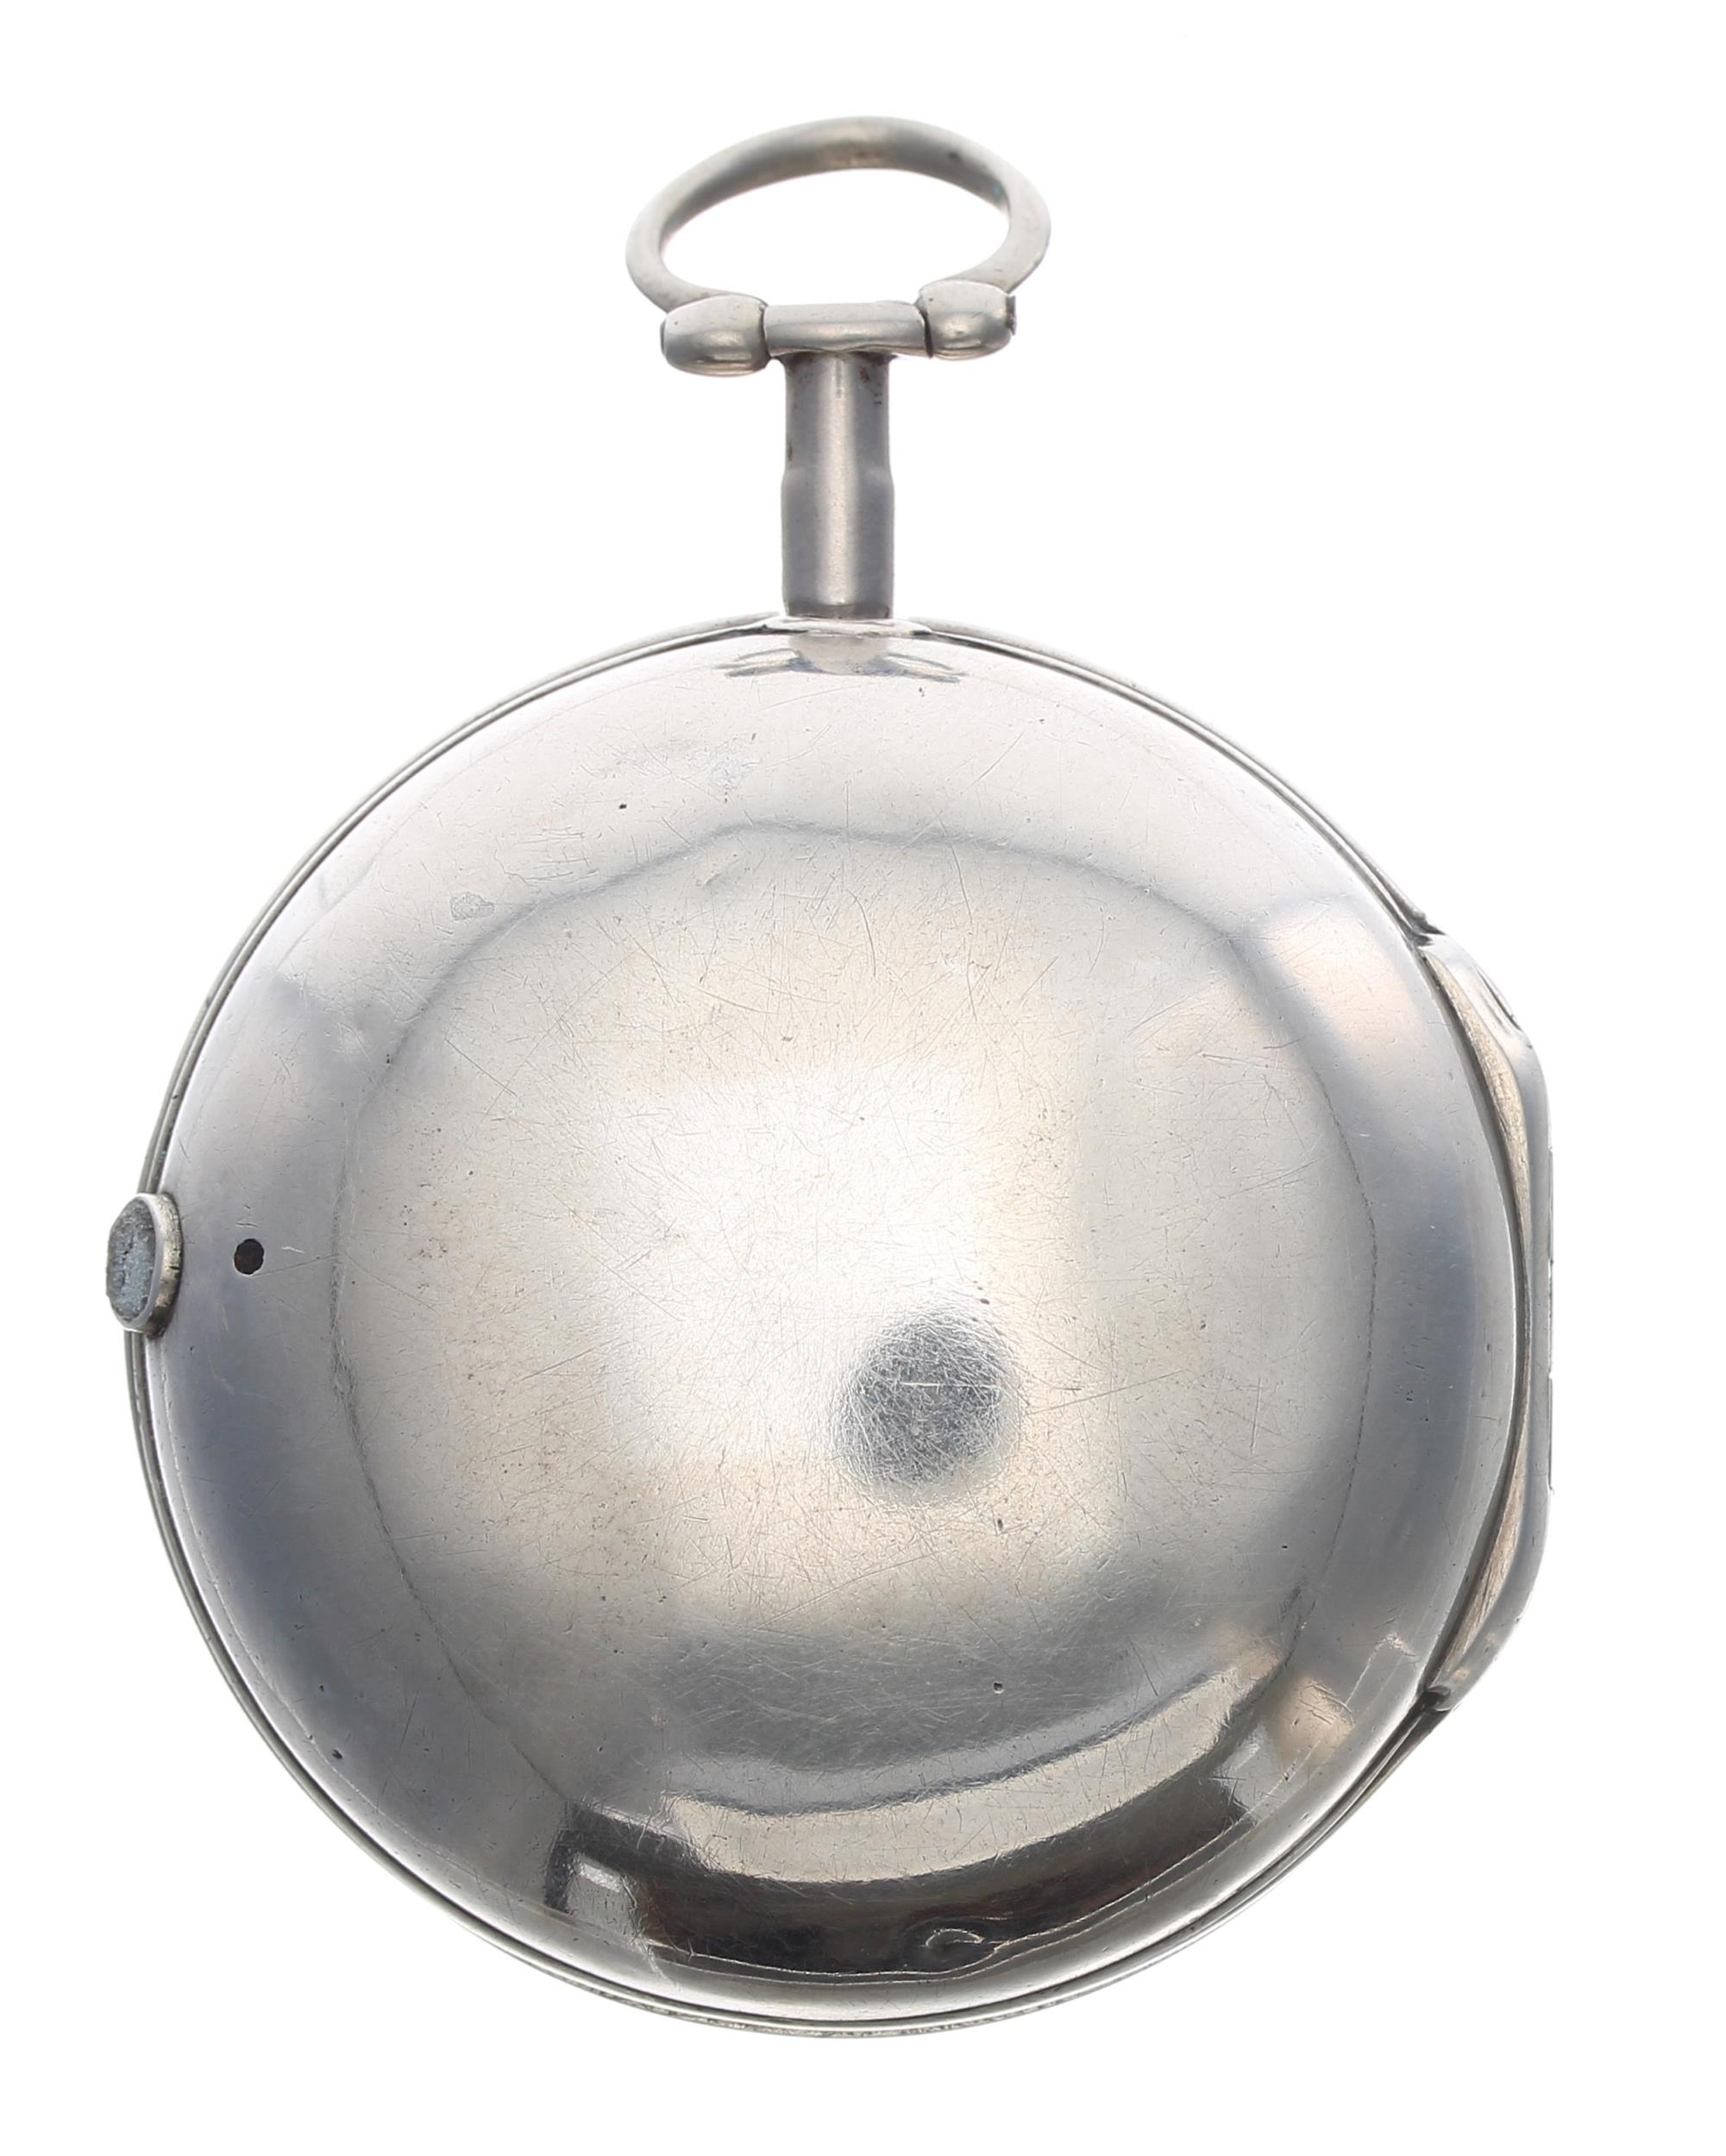 George III English silver pair cased verge pocket watch, London 1765, the fusee movement signed Thos - Image 2 of 6